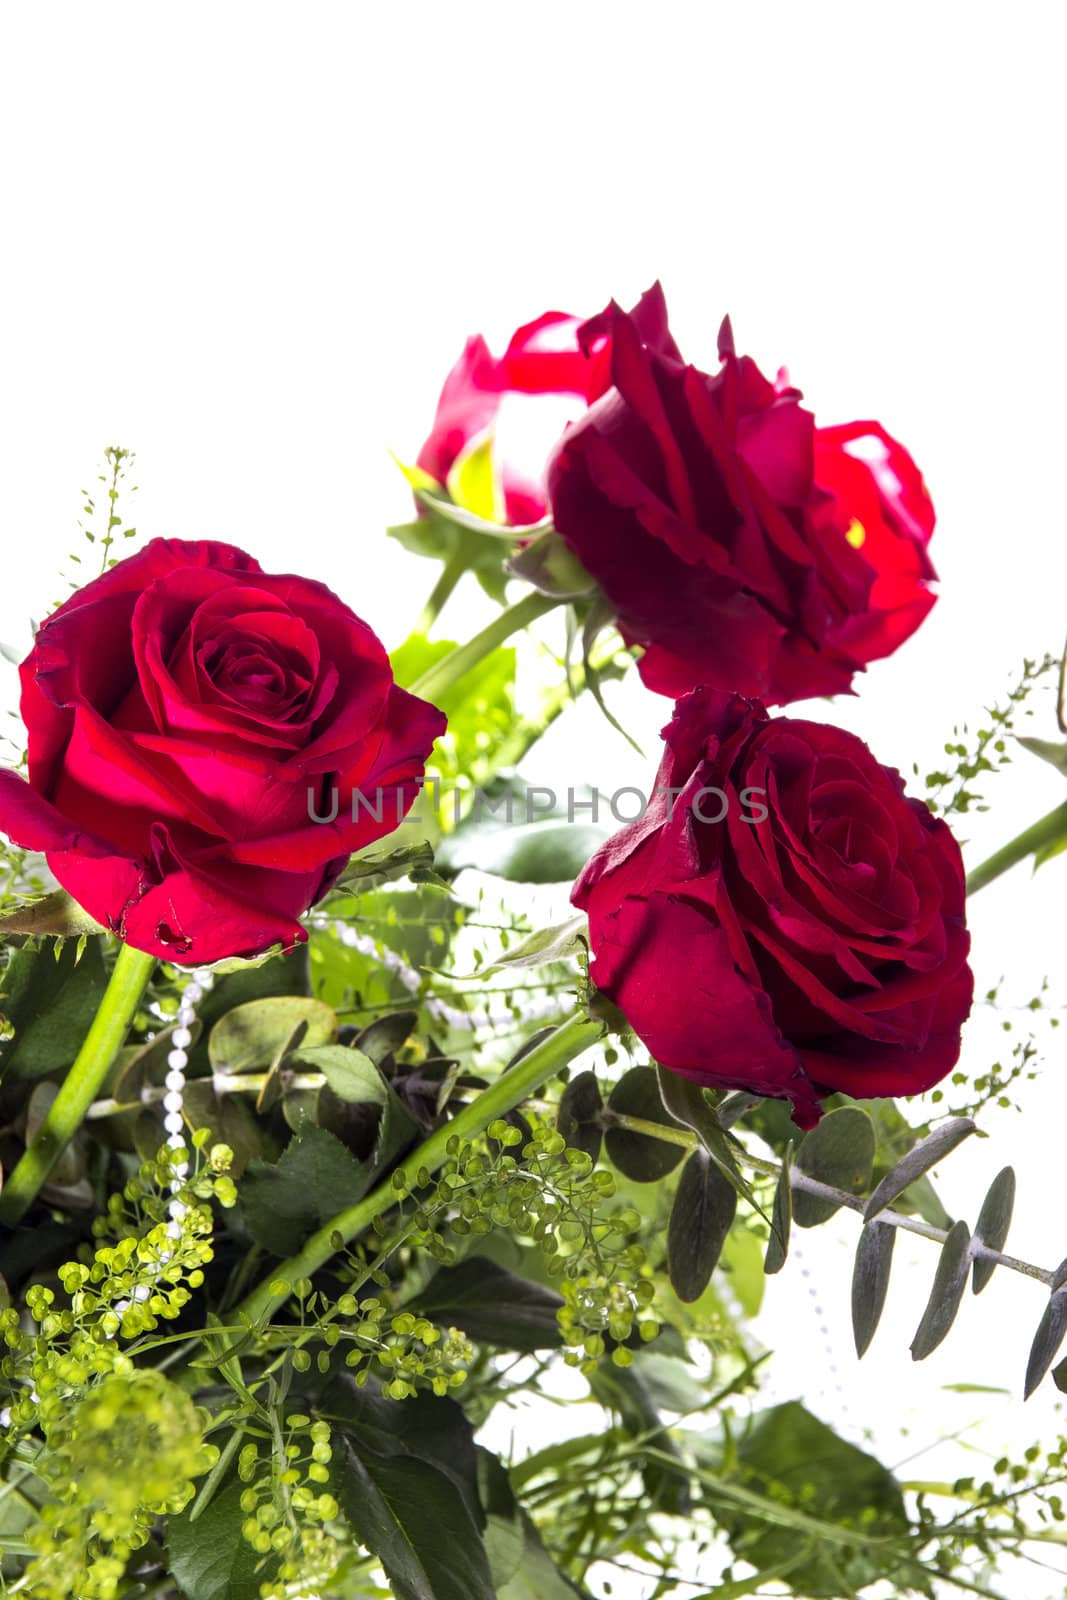 Gorgeous bouquet of red roses on a white background. Fragment.